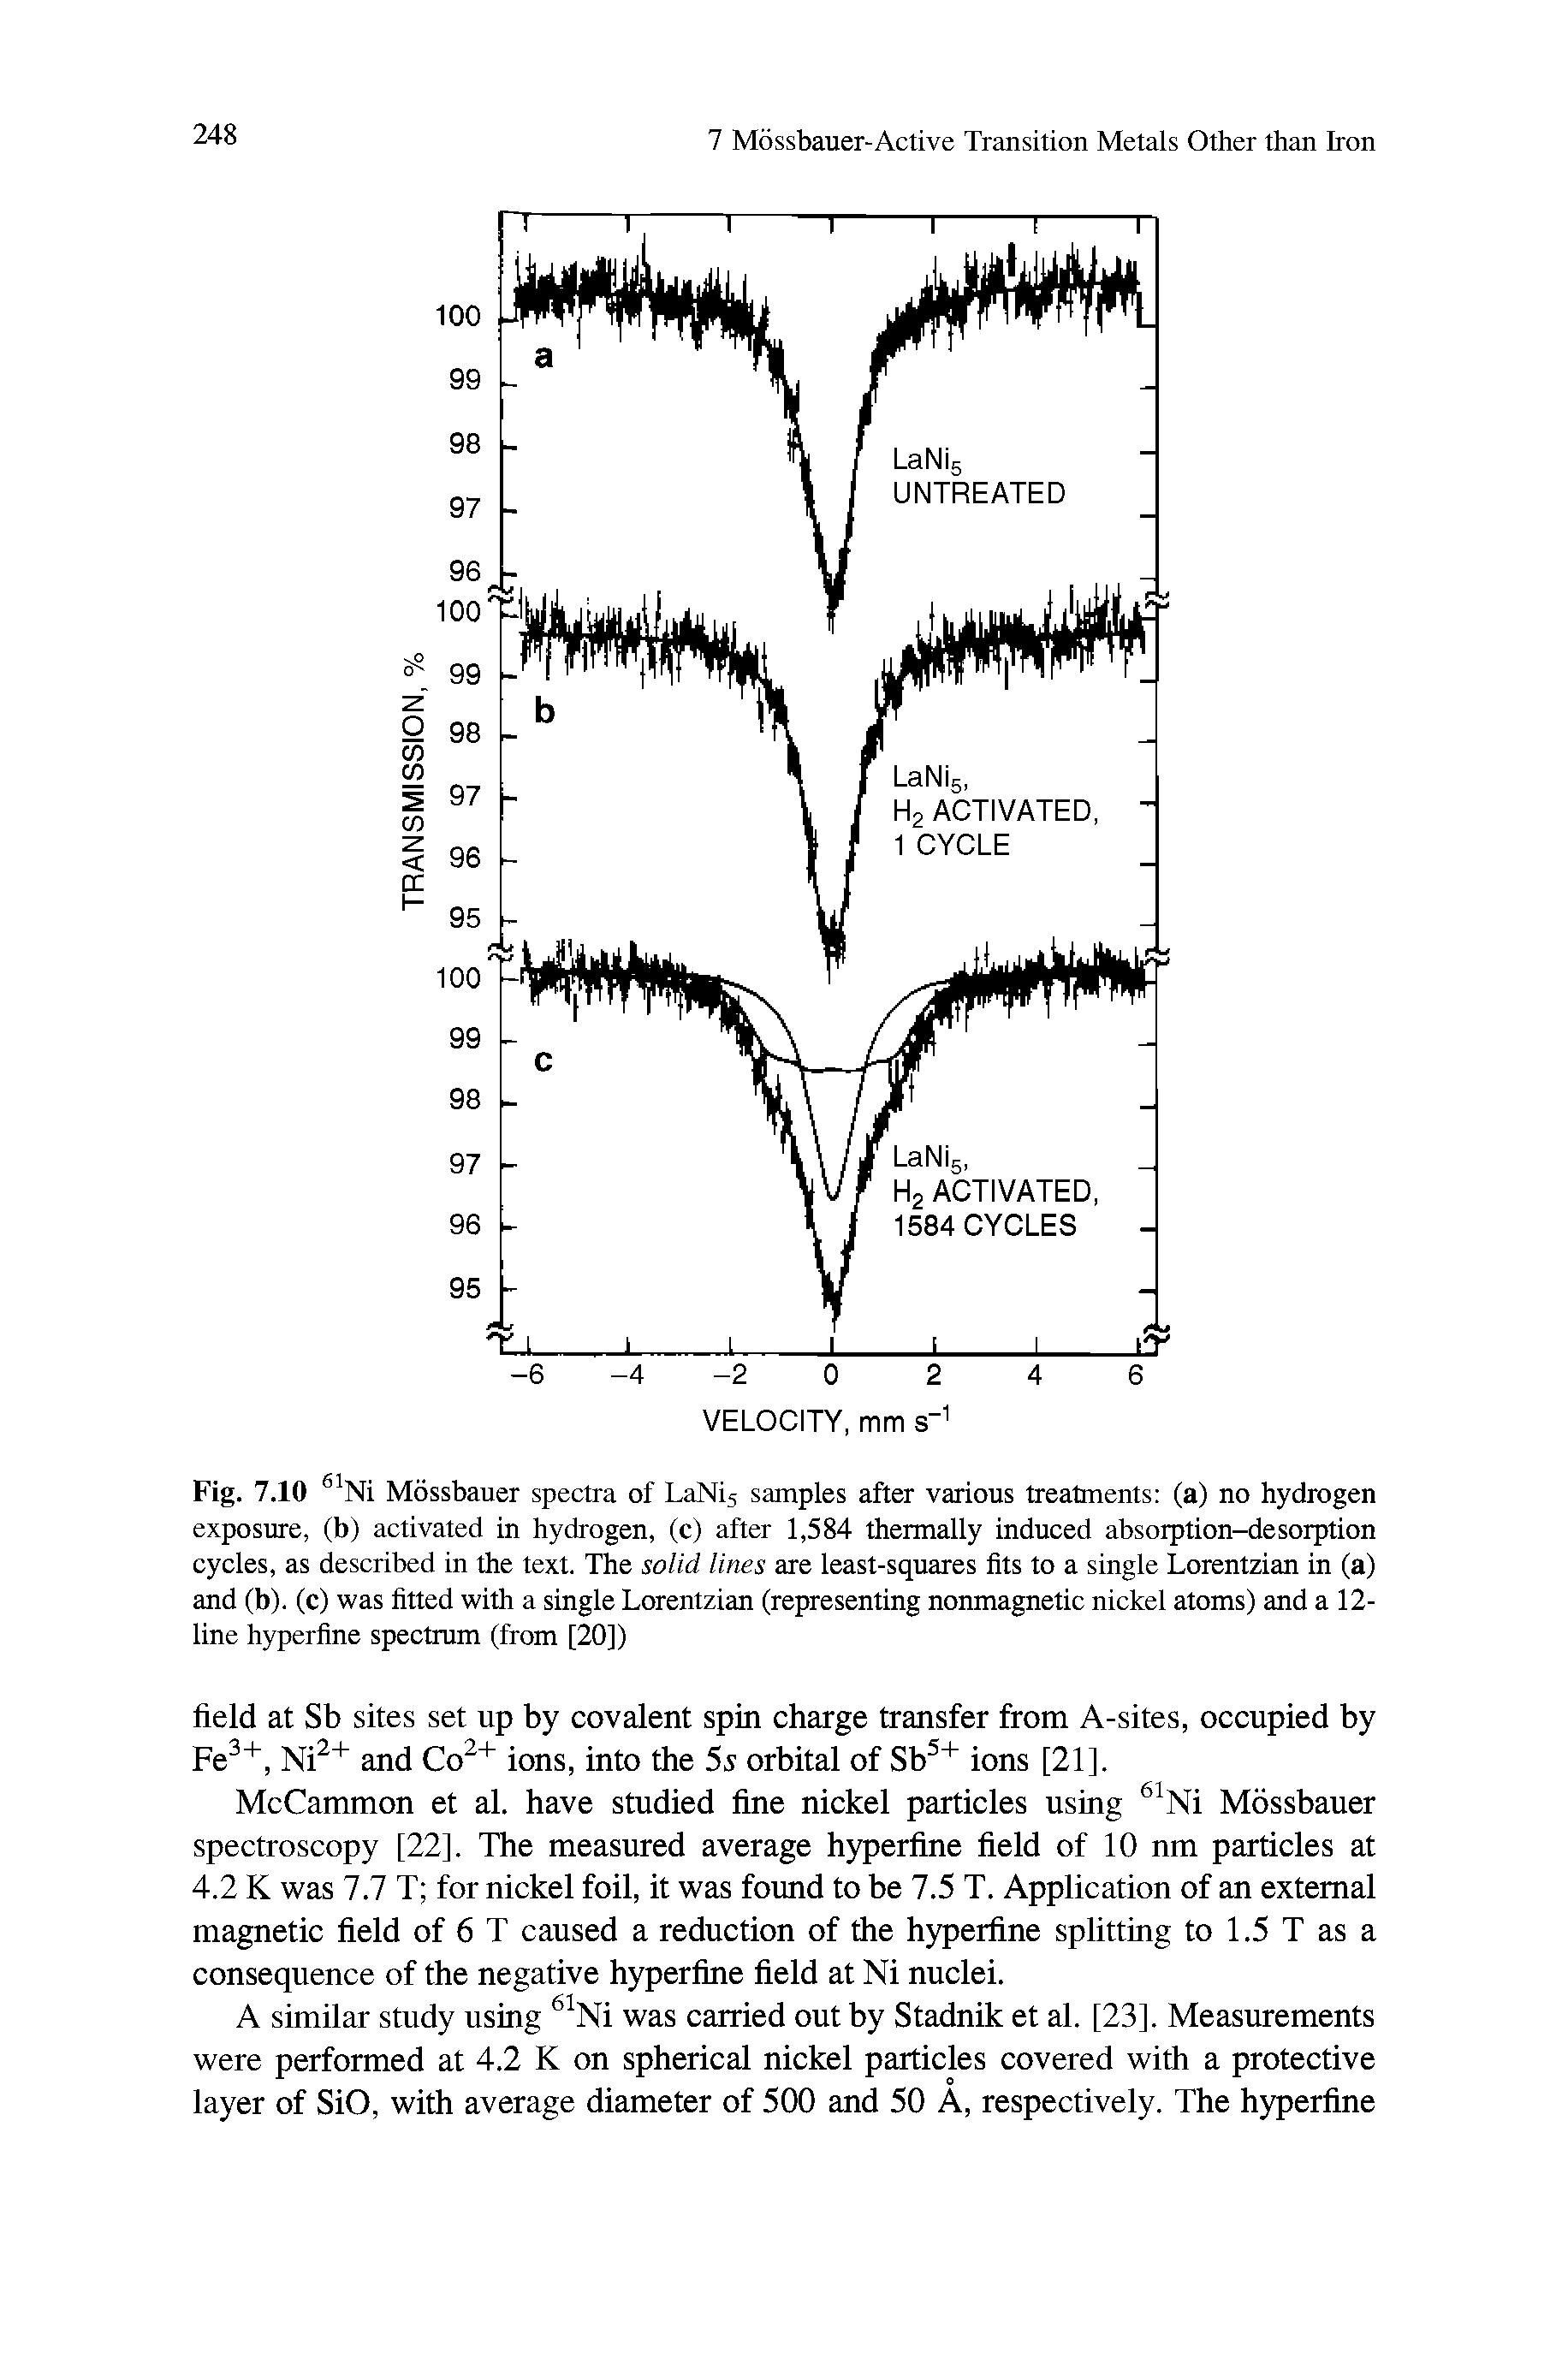 Fig. 7.10 Ni Mossbauer spectra of LaNi5 samples after various treatments (a) no hydrogen exposure, (b) activated in hydrogen, (c) after 1,584 thermally induced absorption-desorption cycles, as described in the text. The solid lines are least-squares fits to a single Lorentzian in (a) and (b). (c) was fitted with a single Lorentzian (representing nonmagnetic nickel atoms) and a 12-line hyperfine spectrum (from [20])...